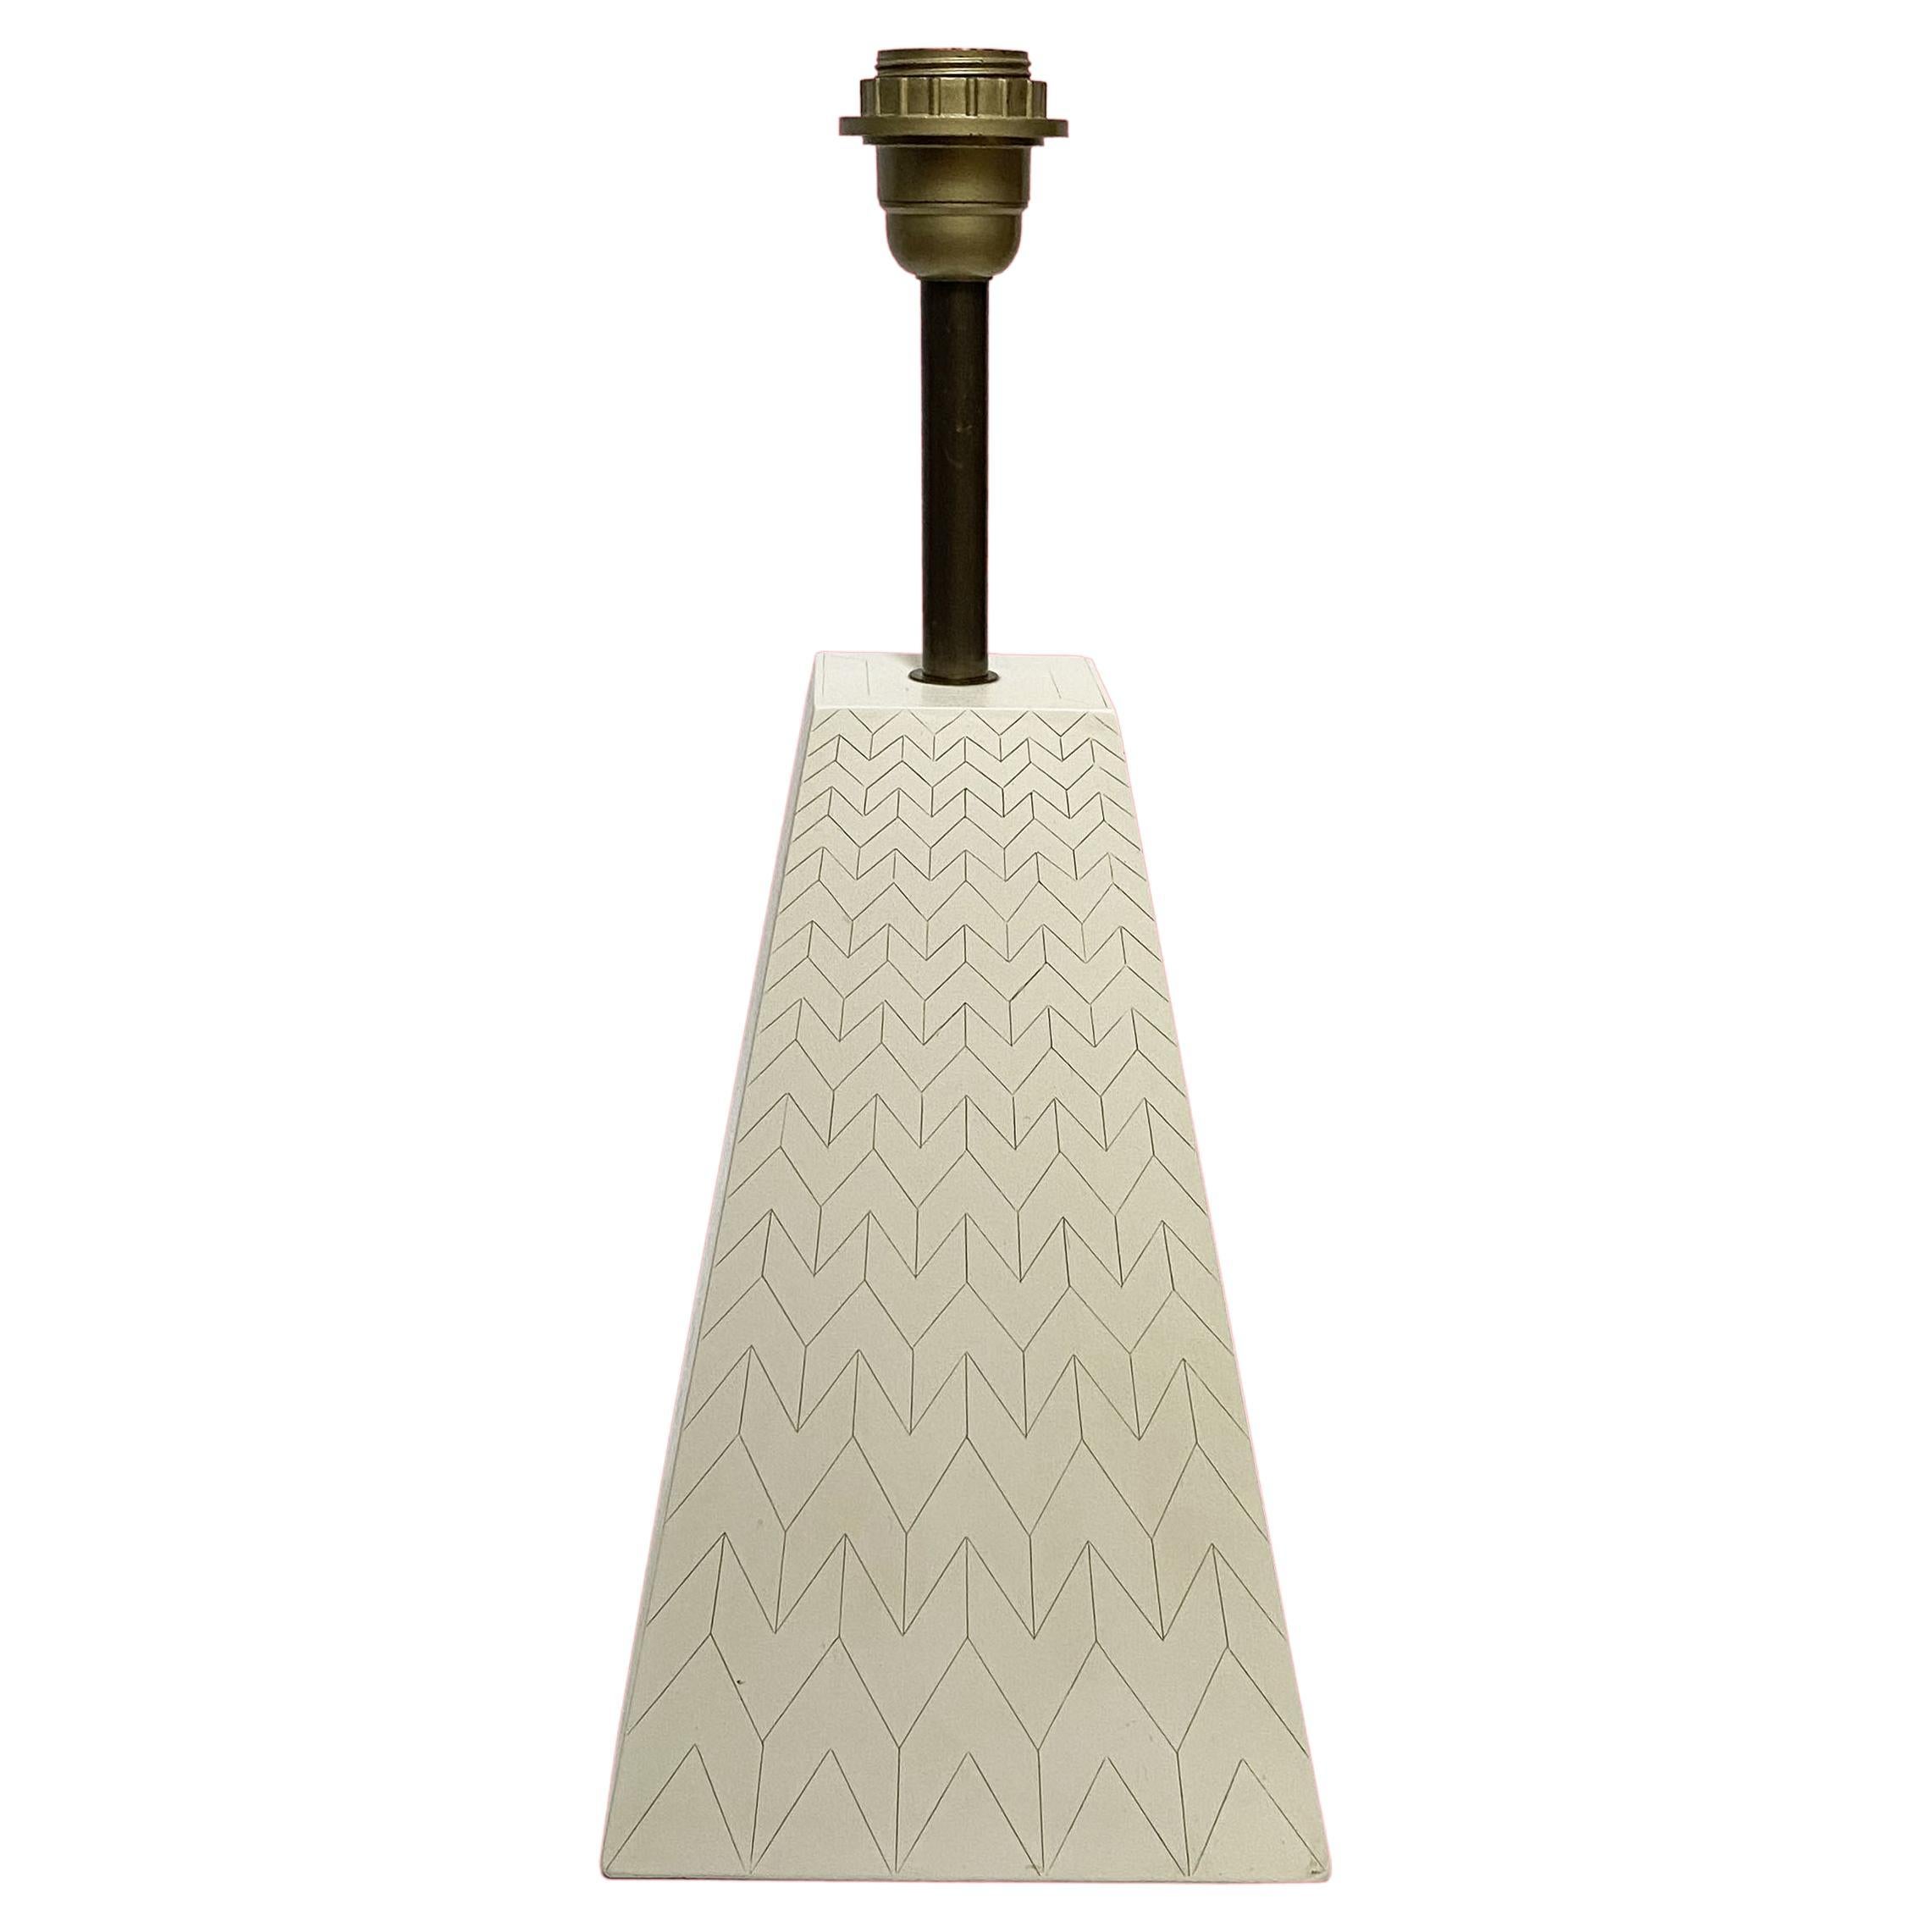 Obelisk or pyramid Lamp in false marquetry in the style of Jansen and Charles. For Sale